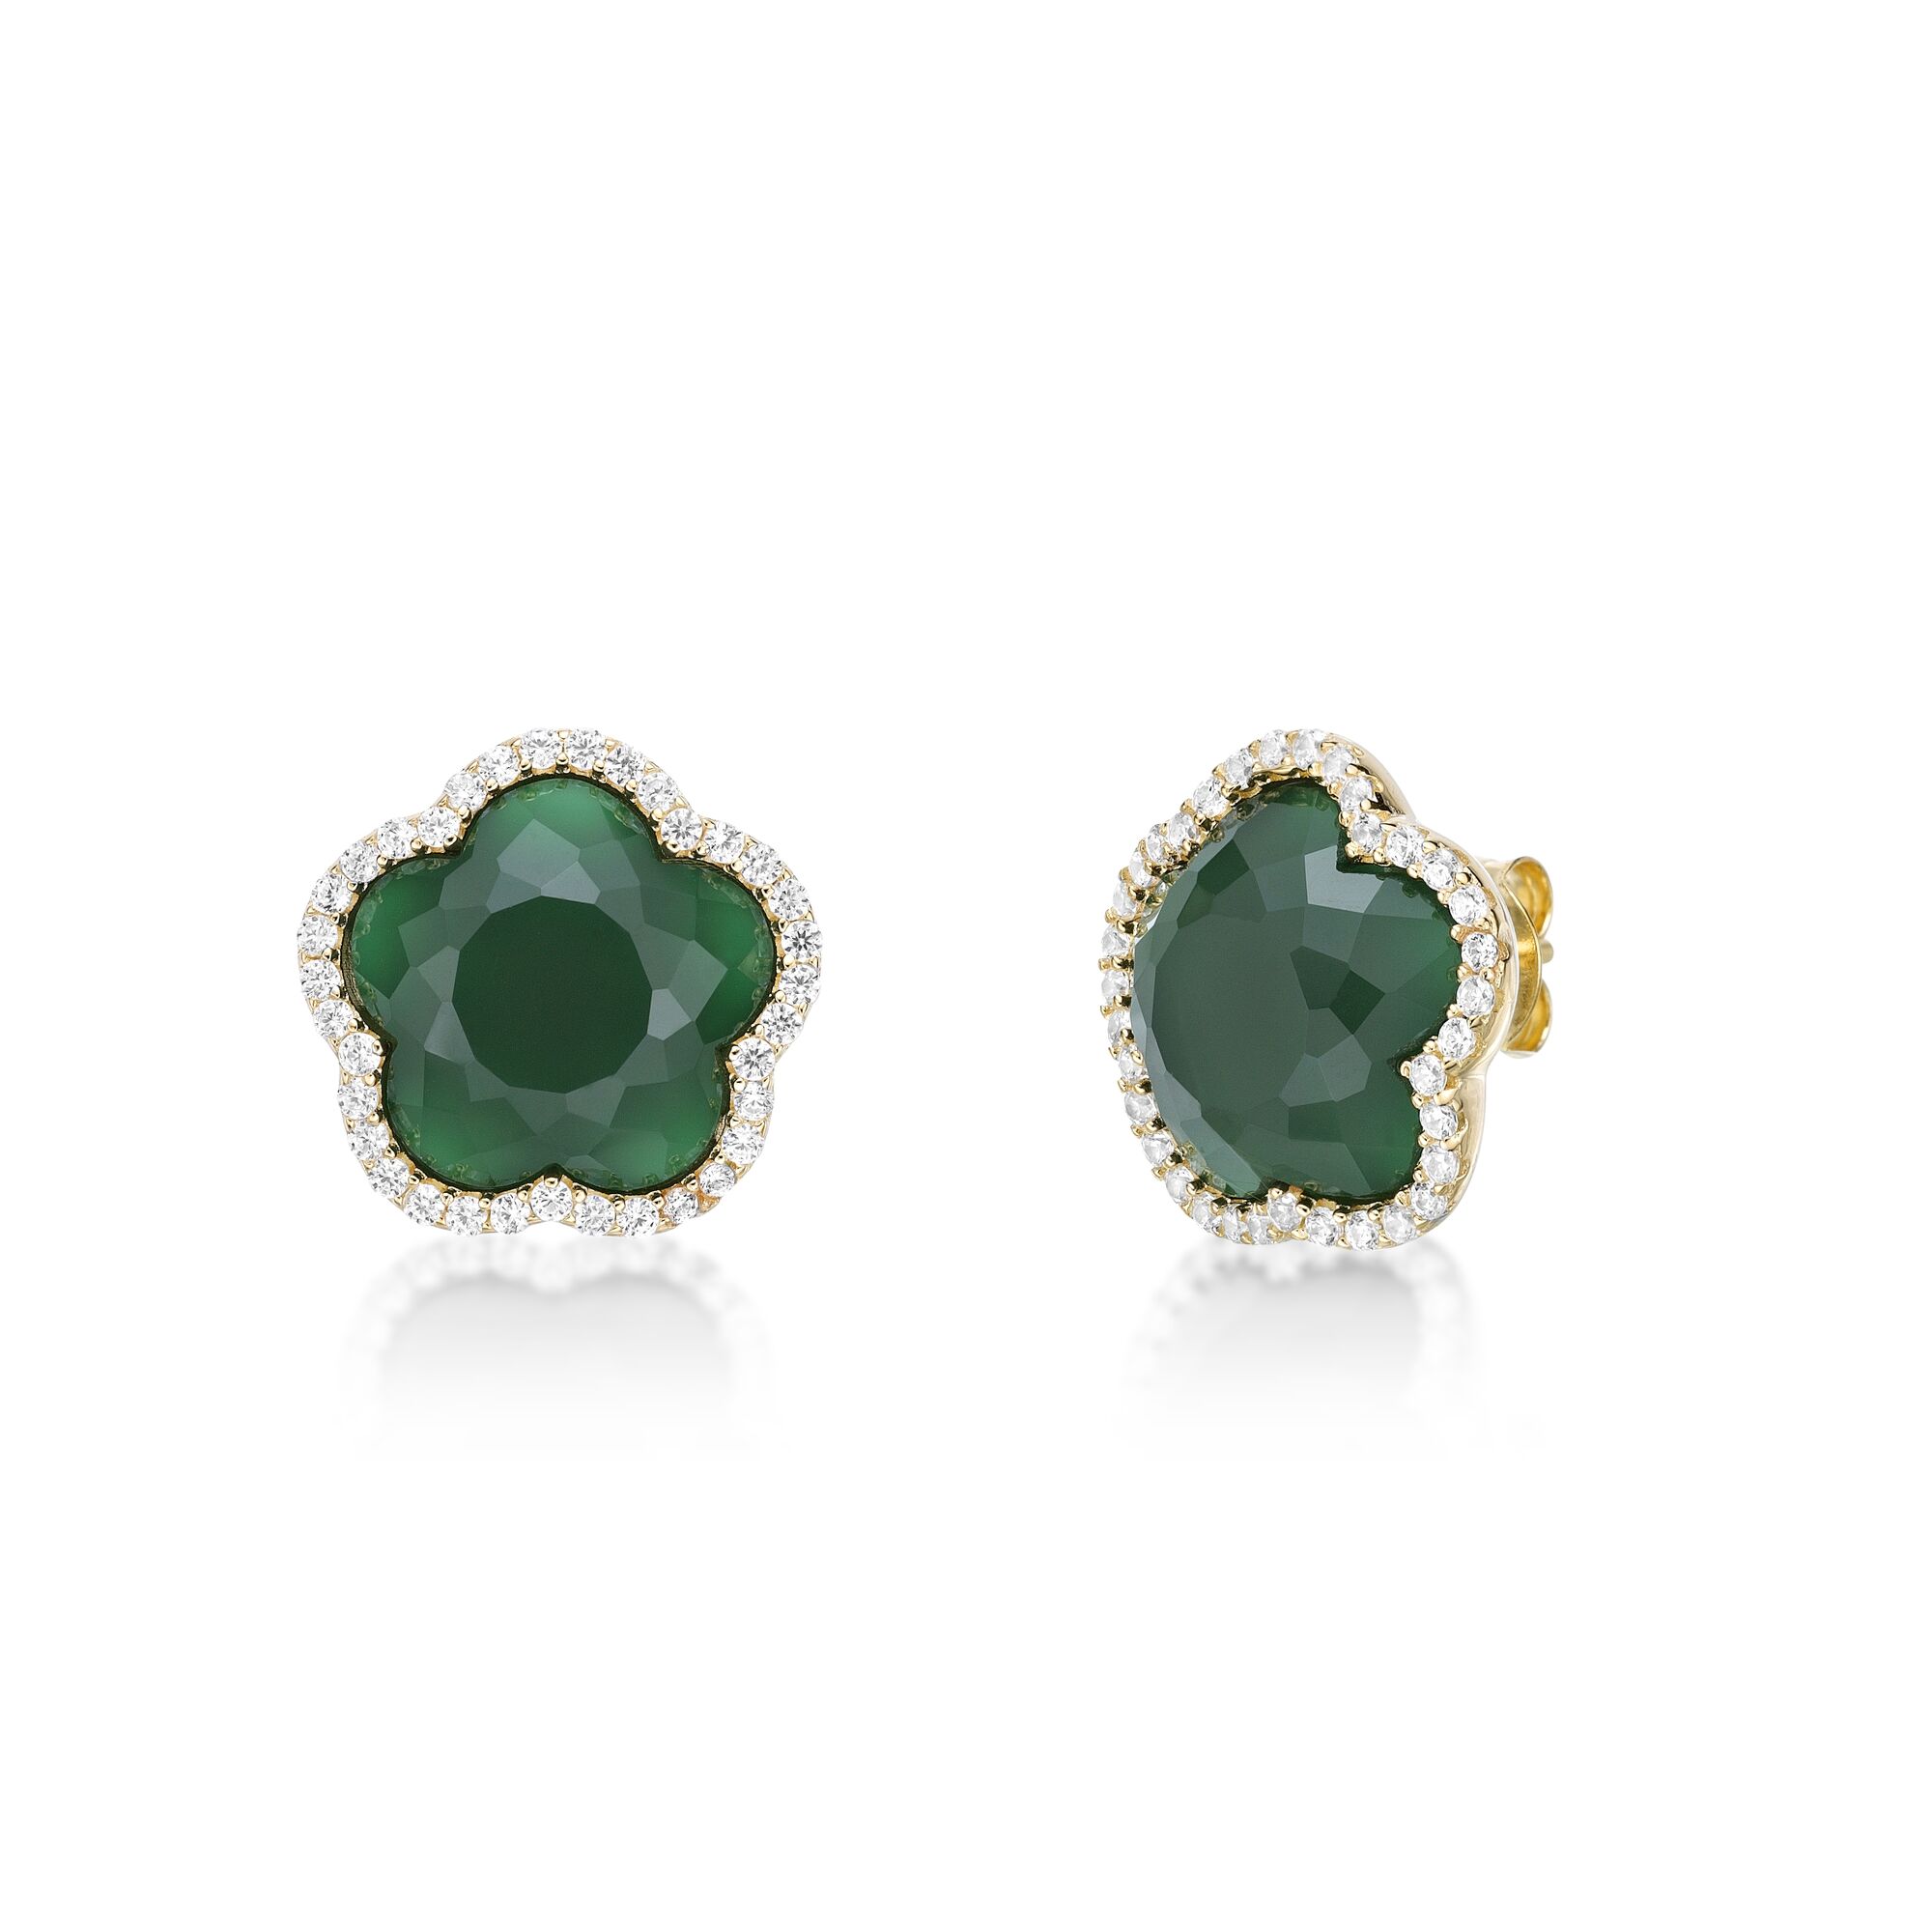 Lavari Jewelers Women’s Green Onyx Five Petal Flower Stud Earrings with Friction Back and Yellow Gold Plating, 925 Sterling Silver, Cubic Zirconia